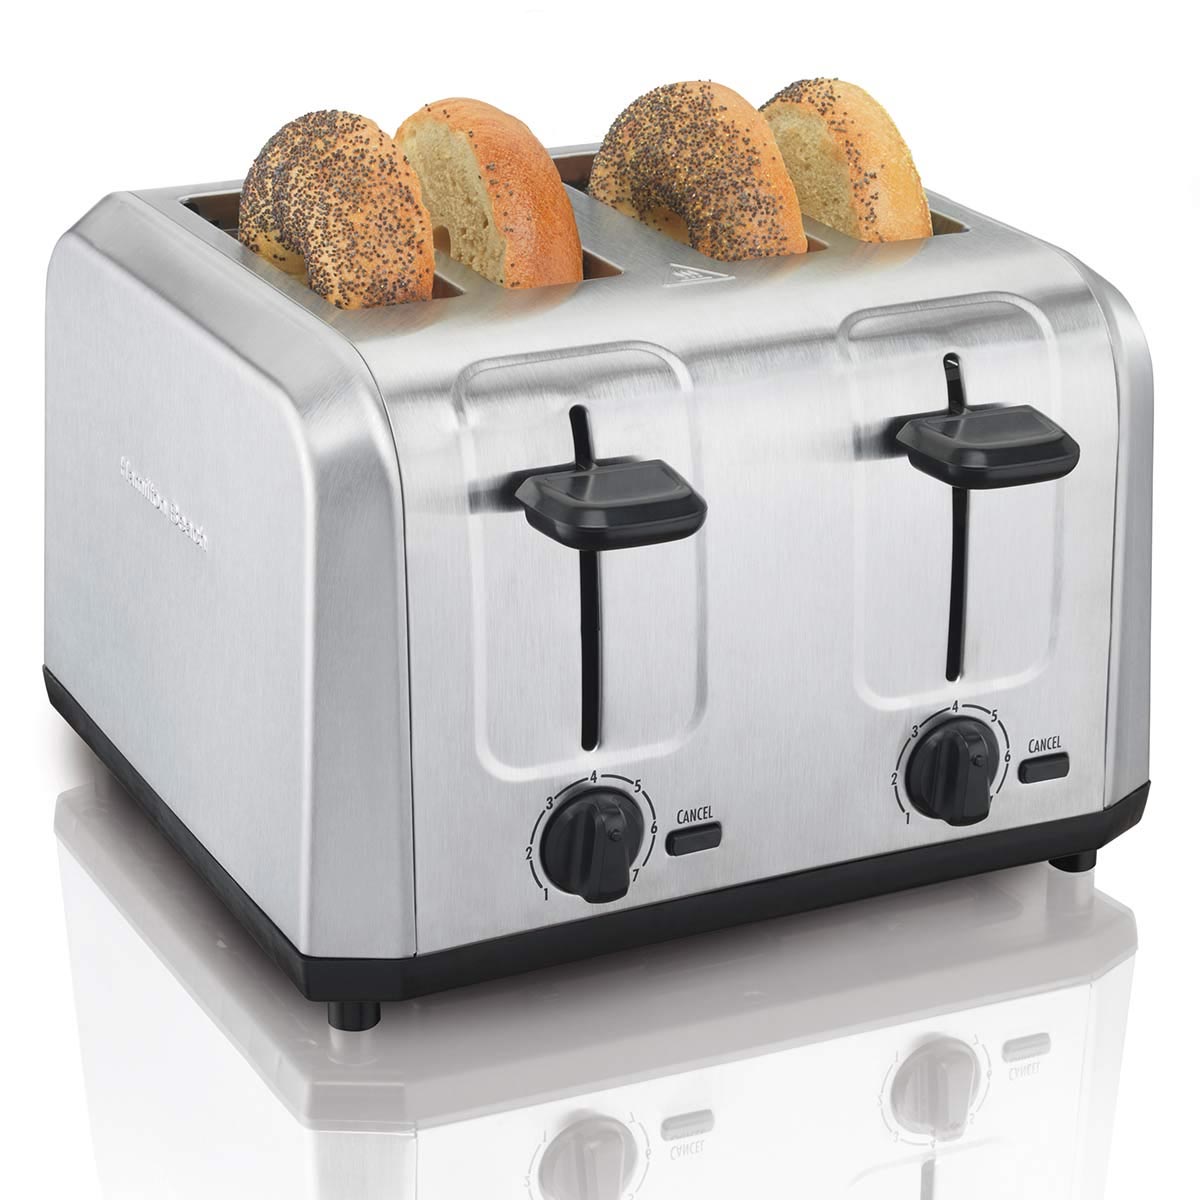 Brushed Stainless Steel 4-Slice Toaster (24910G)